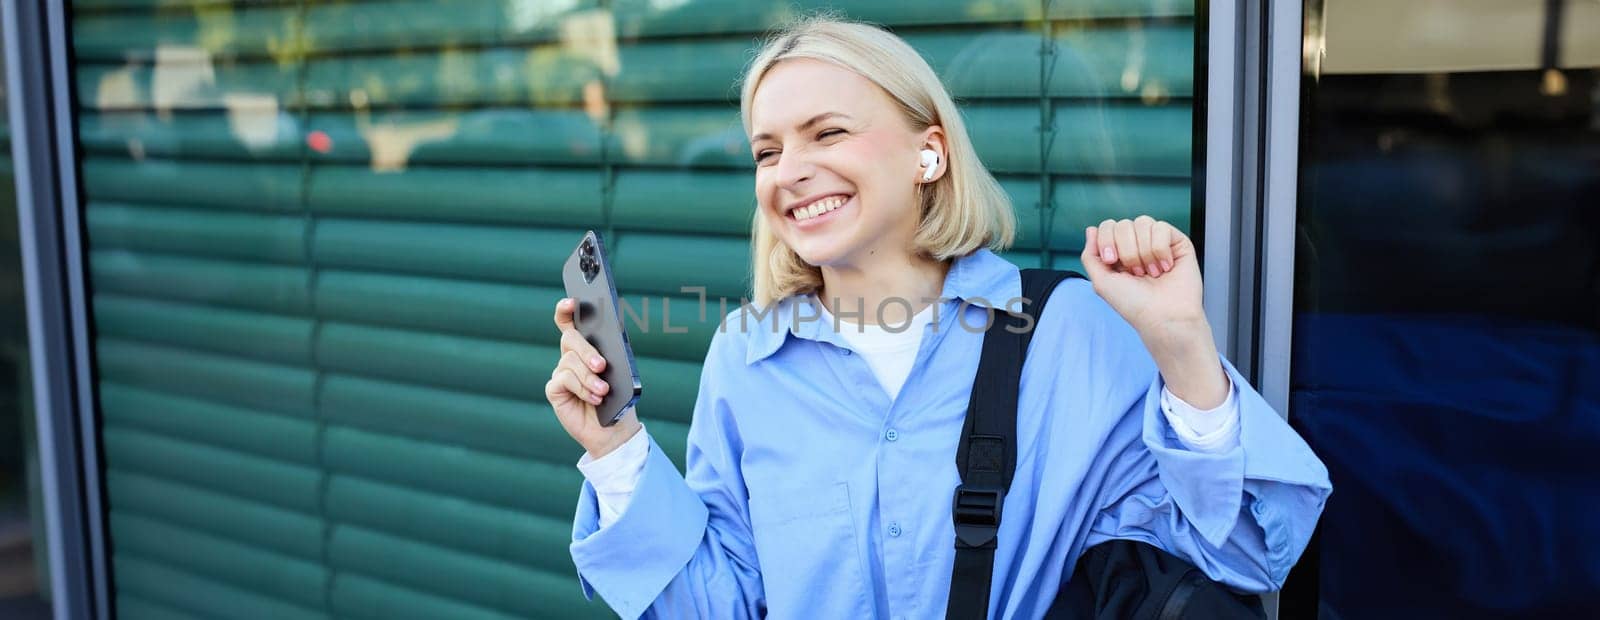 Carefree woman with backpack and mobile phone, wearing wireless earphones, listening to music and smiling, standing on street in city centre, laughing.